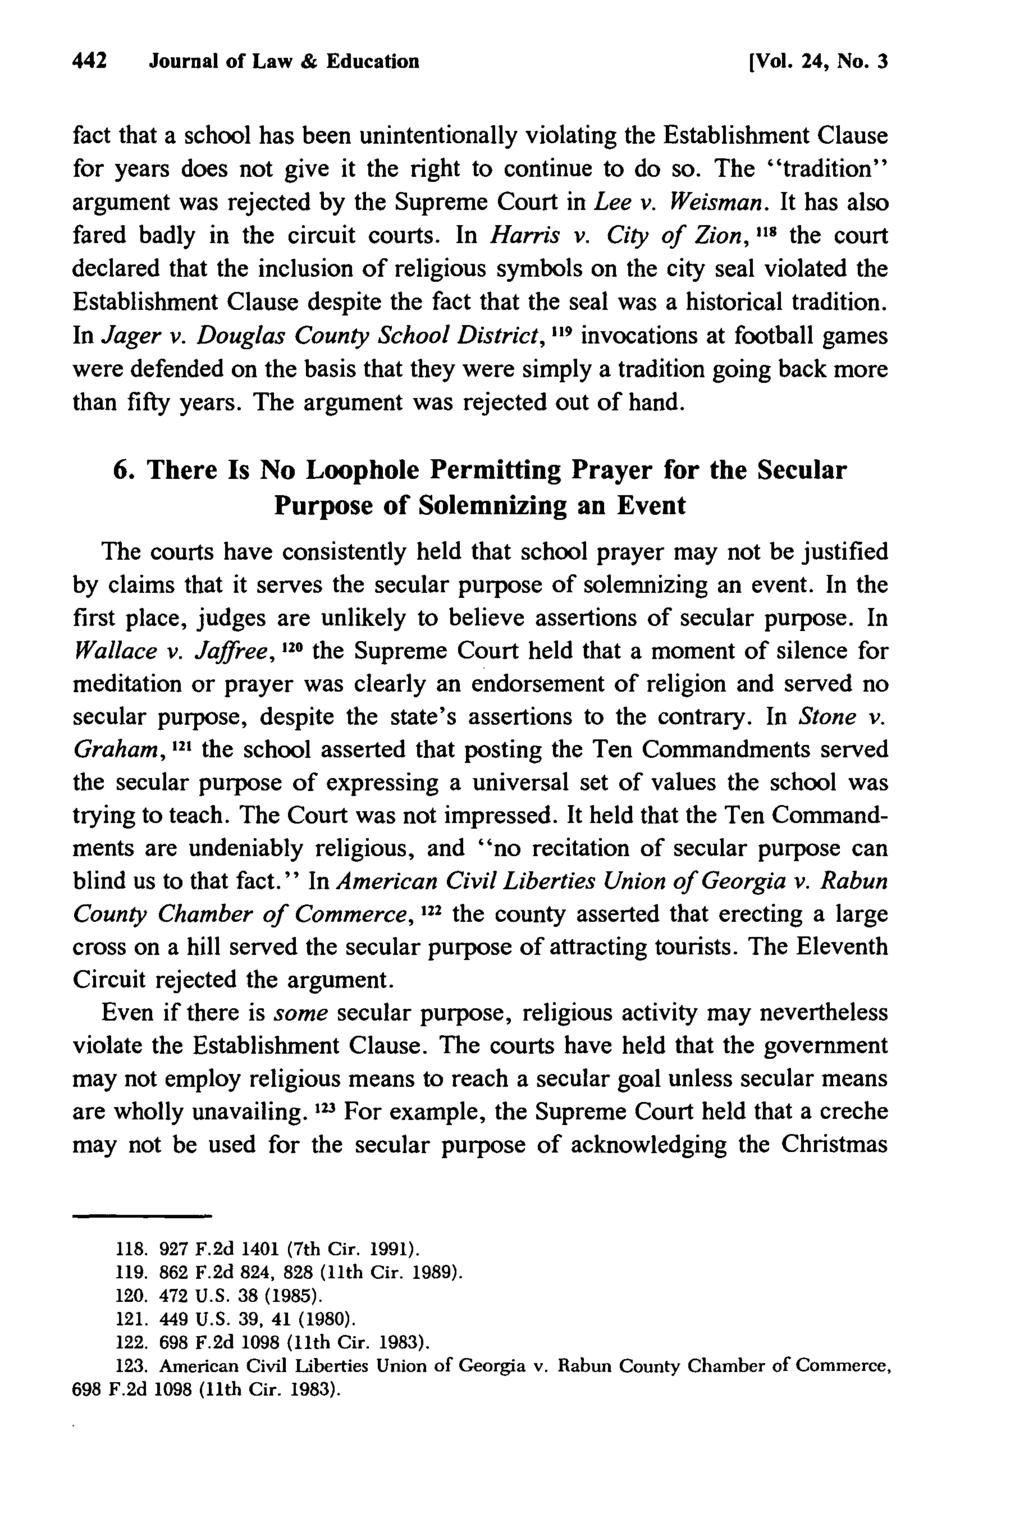 442 Journal of Law & Education [Vol. 24, No. 3 fact that a school has been unintentionally violating the Establishment Clause for years does not give it the right to continue to do so.